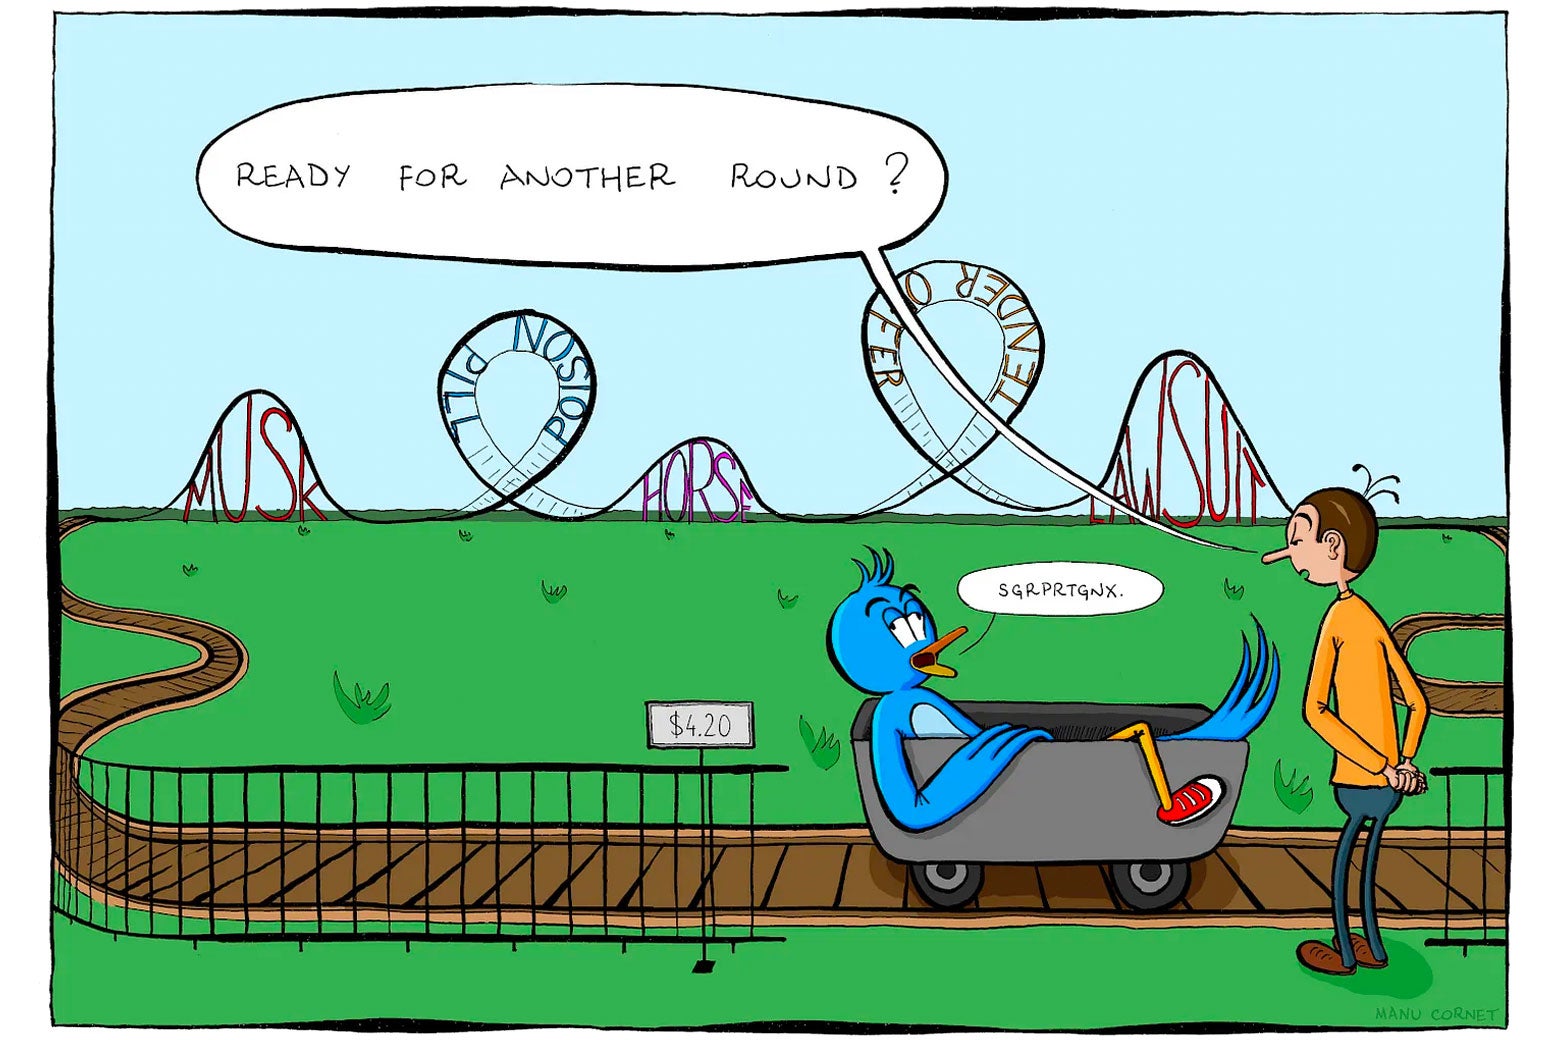 A dizzy Twitter bird that has just gone on a roller coaster.